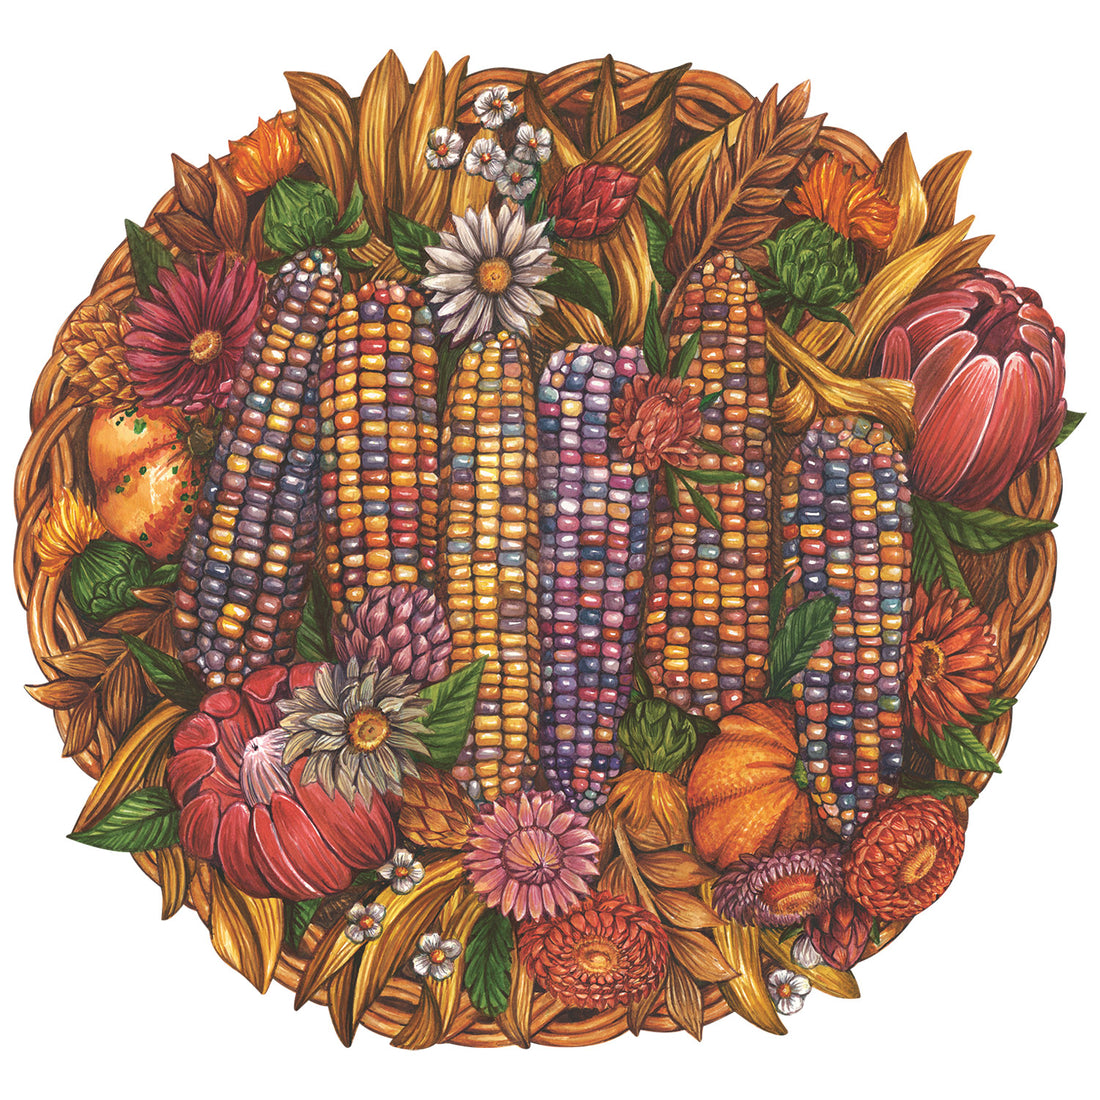 A round, die-cut illustration of a wicker basket full of richly fall-colored flowers, foliage, and six corn cobs of the &quot;glass gem&quot; variety, featuring vibrant yellow, orange, purple and blue kernels. 